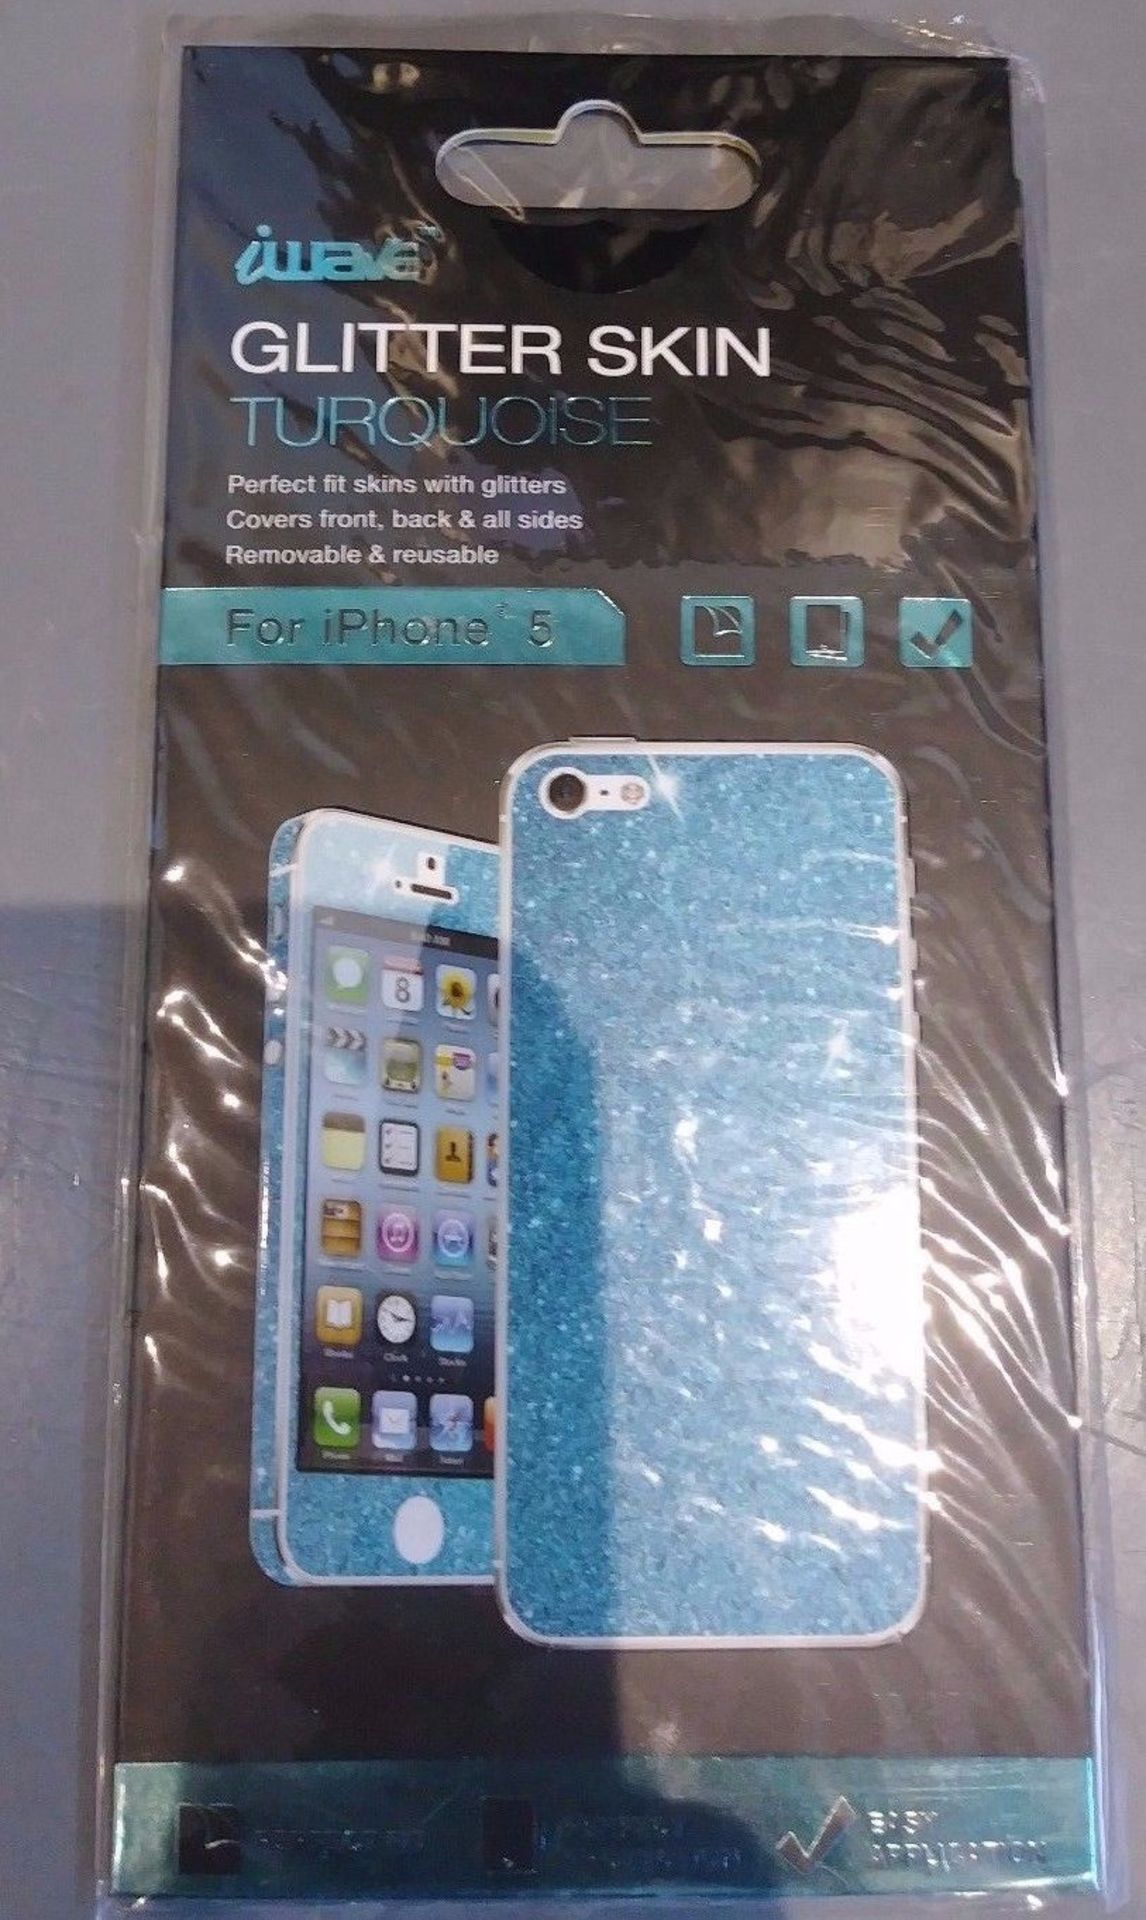 LOT OF 10 iWAVE TURQUOISE GLITTER SKIN FOR IPHONE 5 ICP5107-TU